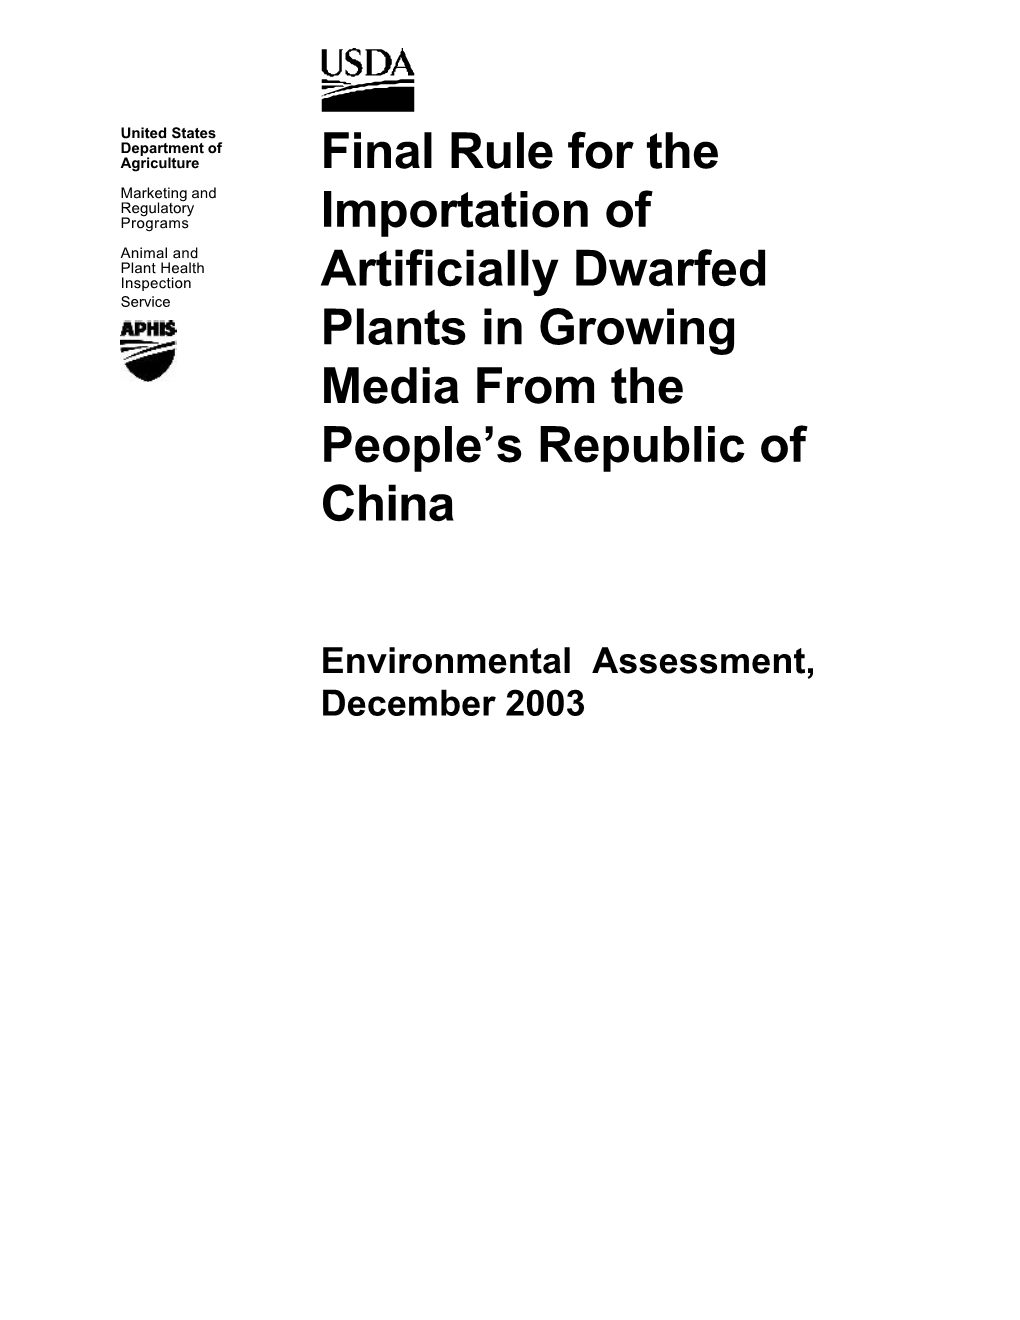 Final Rule for the Importation of Artificially Dwarfed Plants in Growing Media from the People’S Republic of China